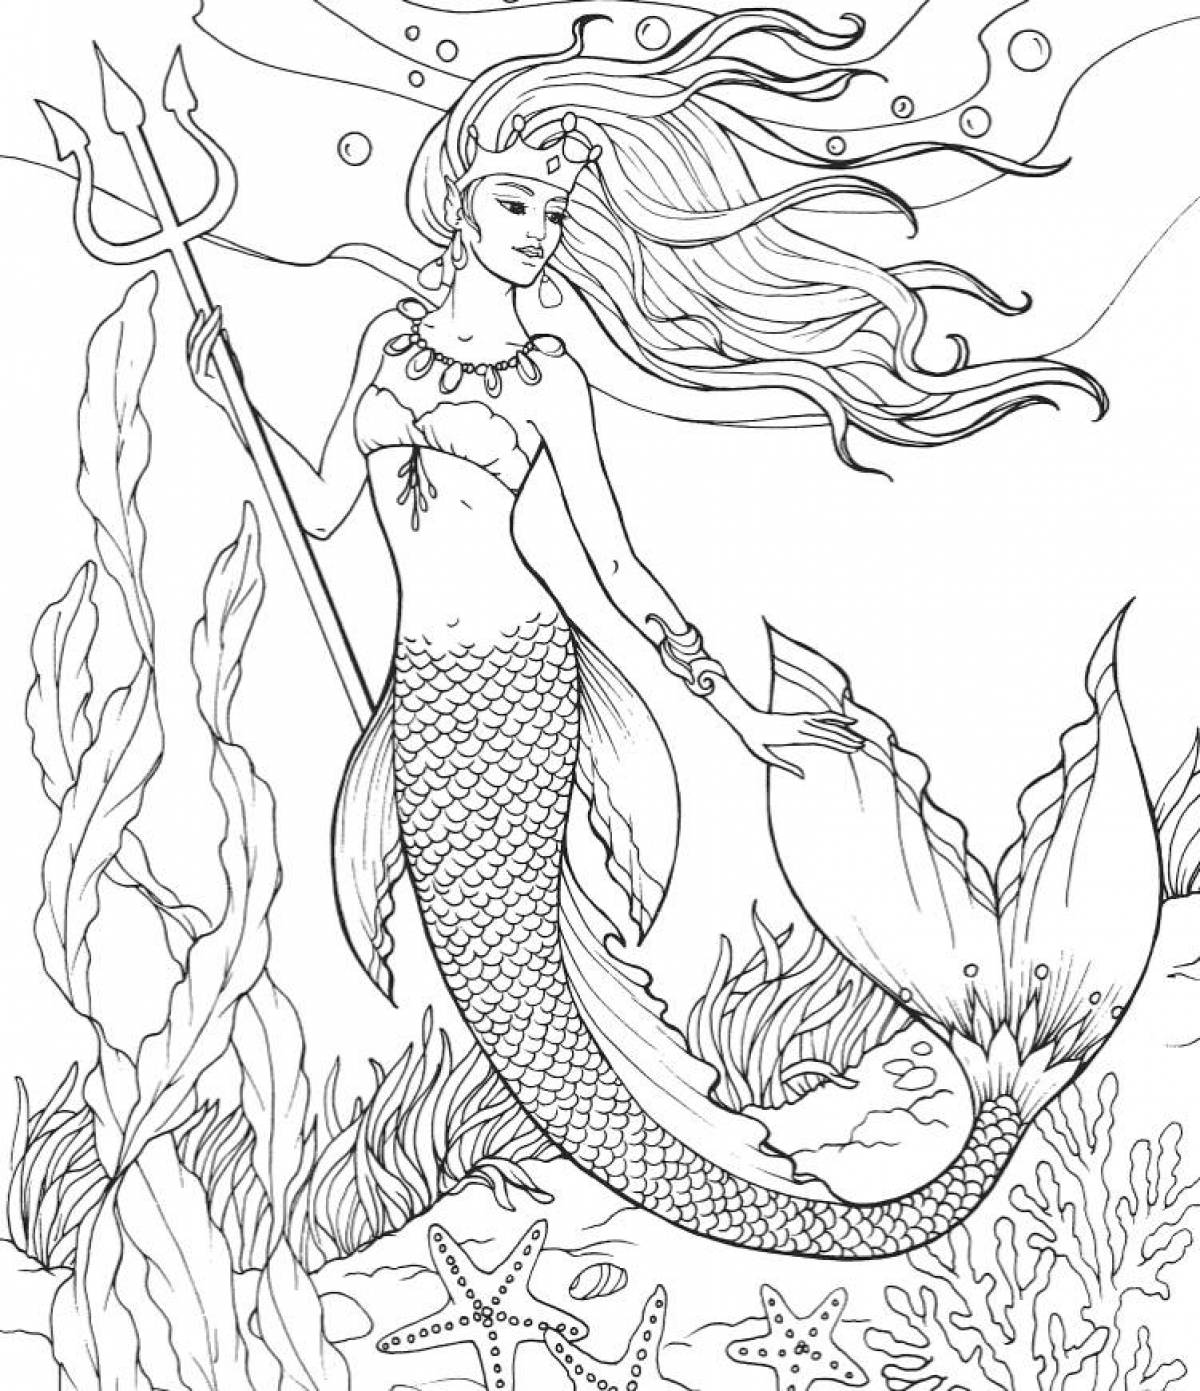 Coloring page for girls mermaid